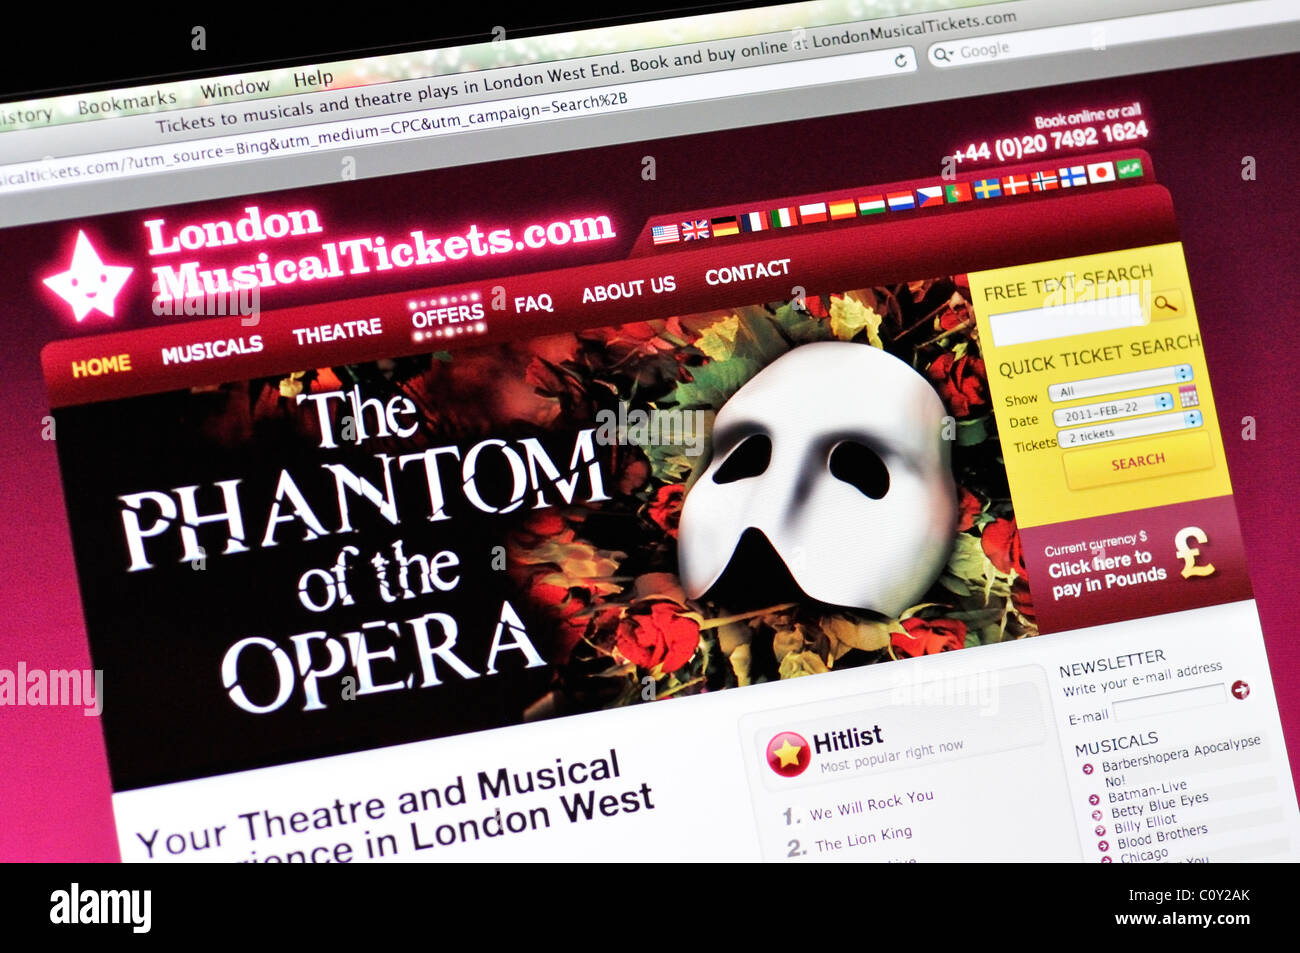 London musicals ticket box office sito web Foto Stock